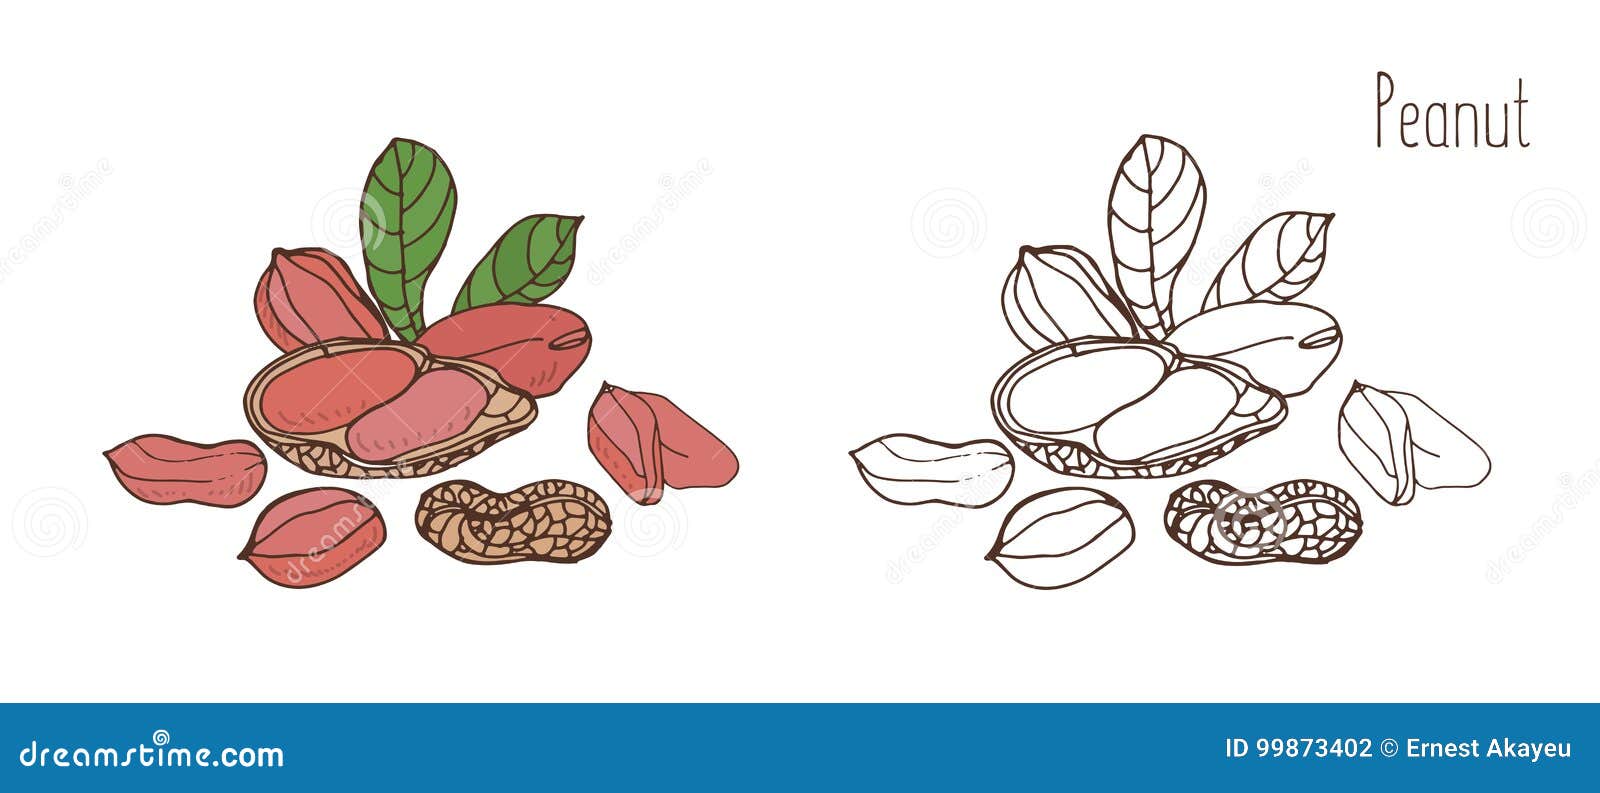 colored and monochrome drawings of peanut in shell and shelled with leaves. delicious edible drupe or nut hand drawn in